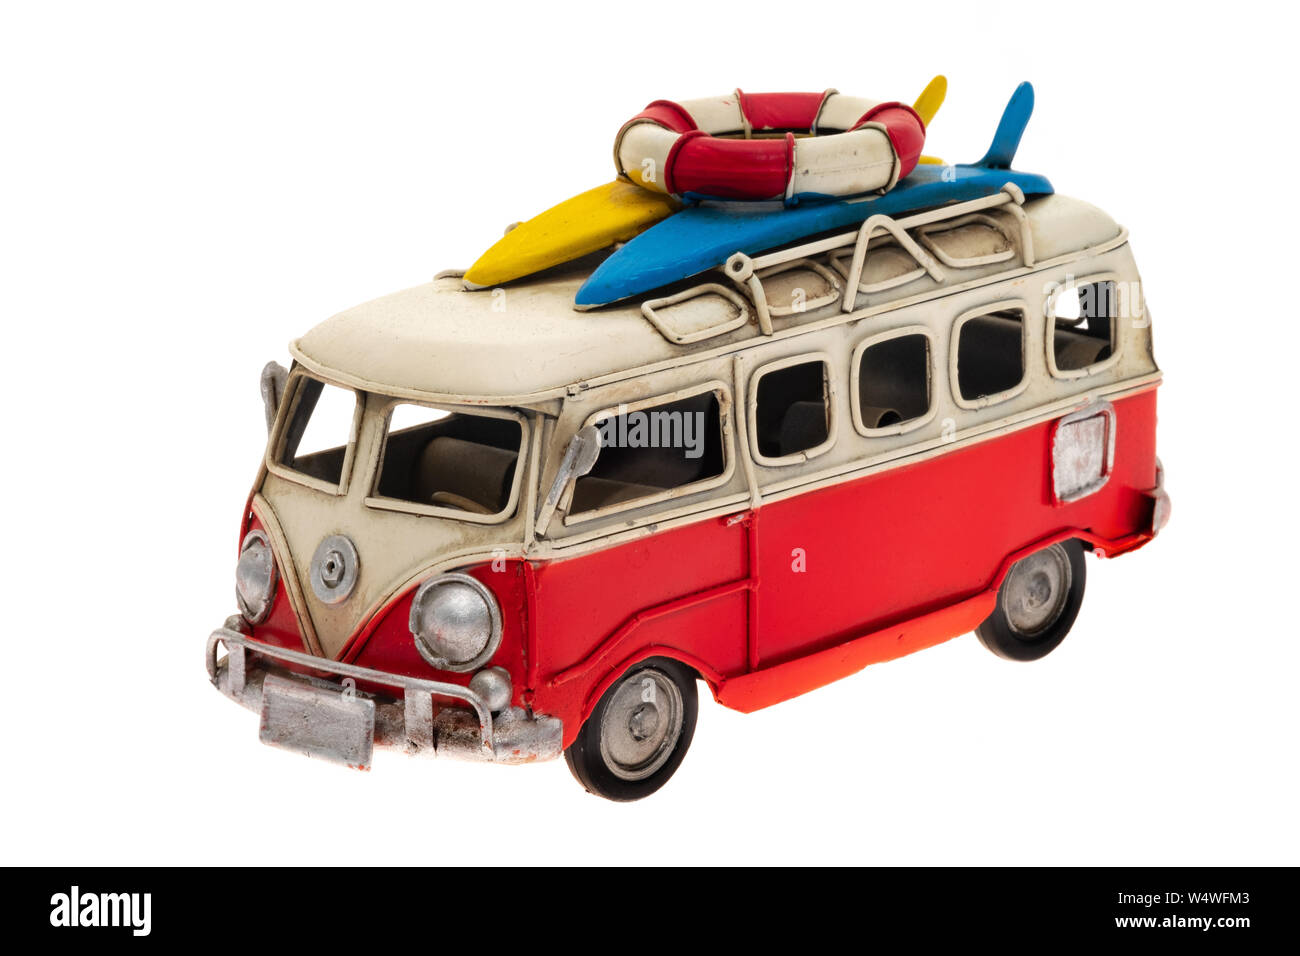 Vw van Cut Out Stock Images & Pictures - Alamy